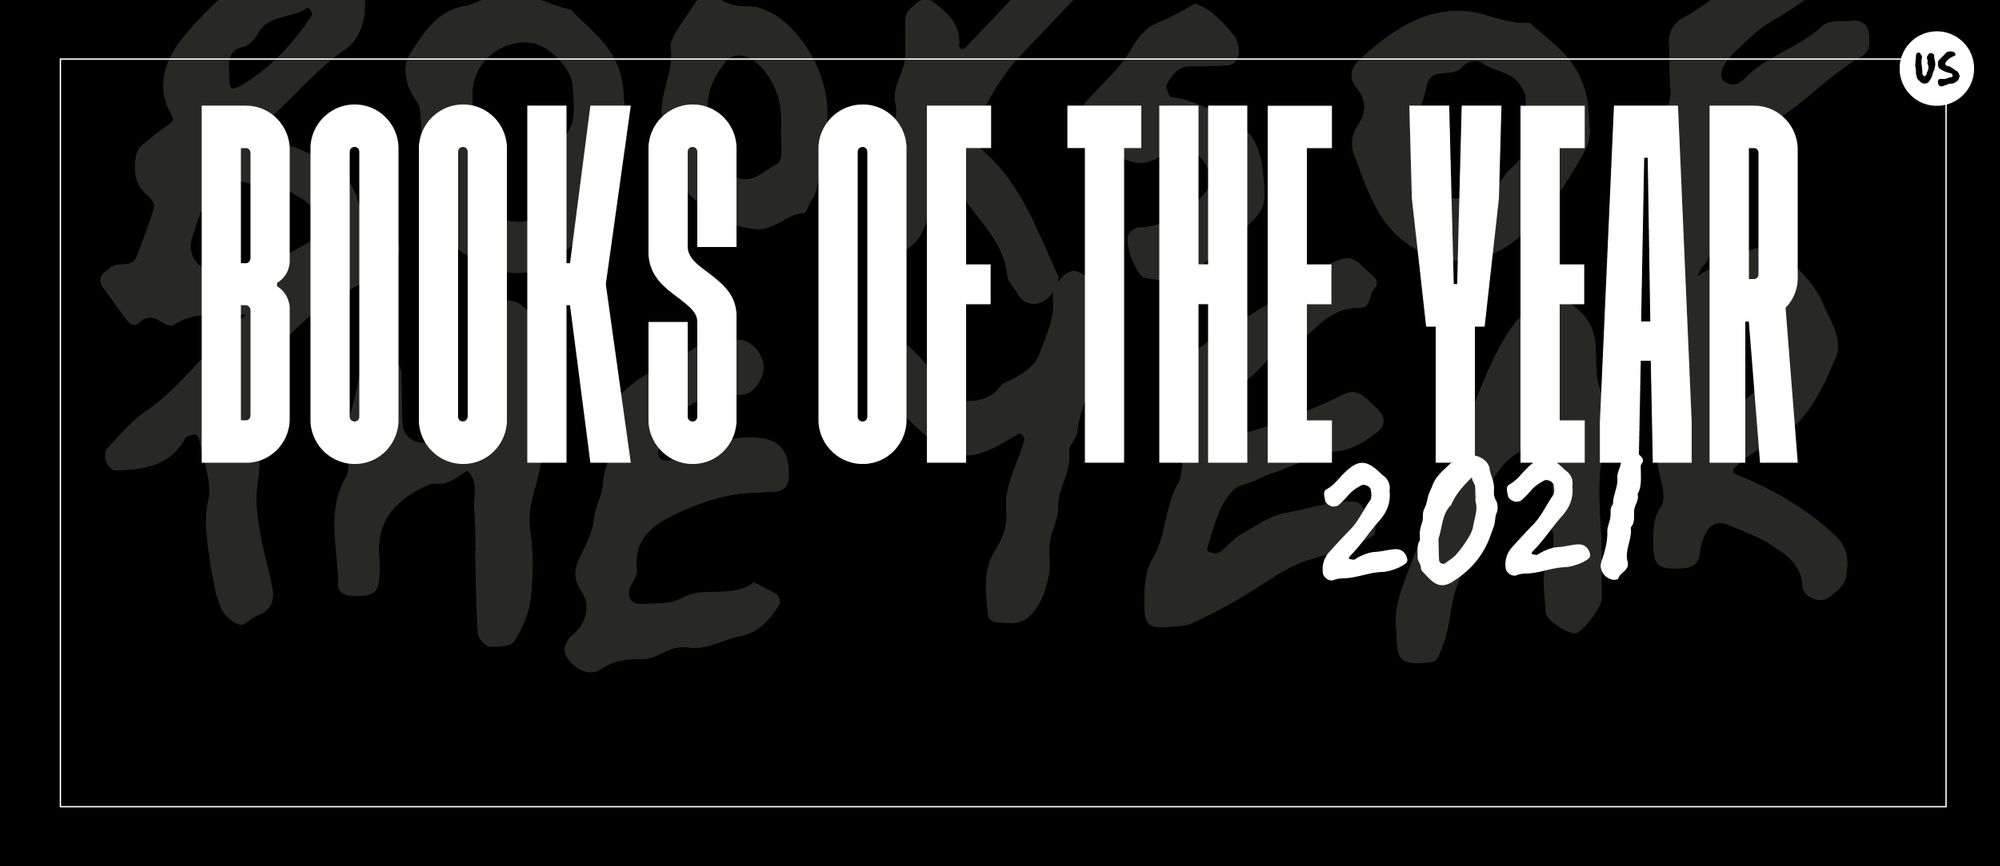 US Books of the Year 2021